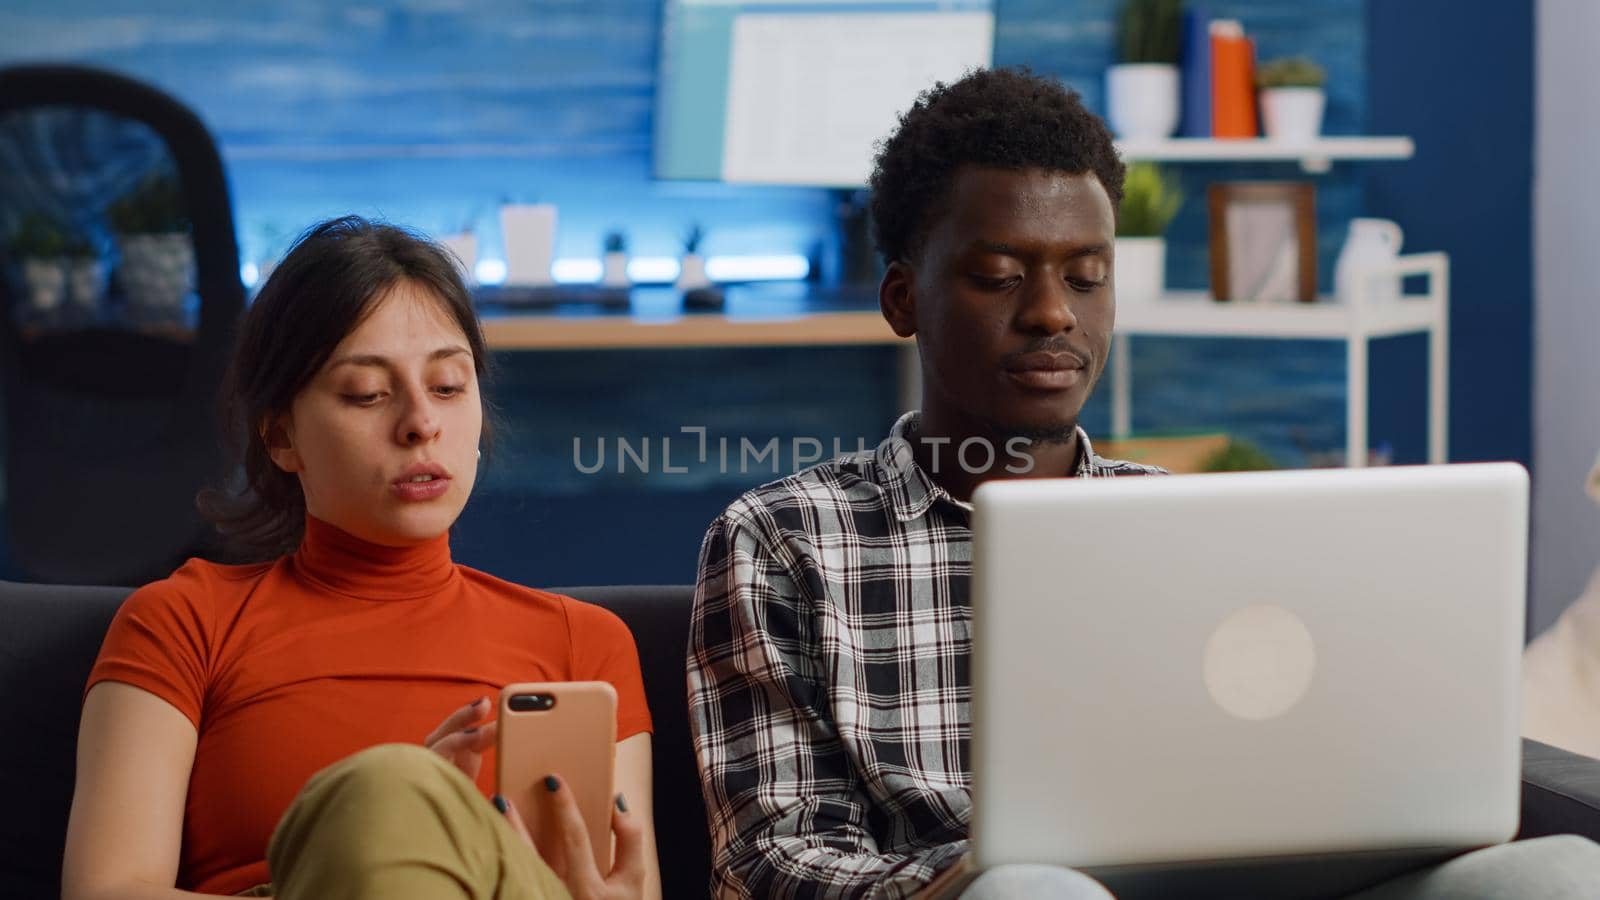 Modern interracial couple using technology on couch by DCStudio